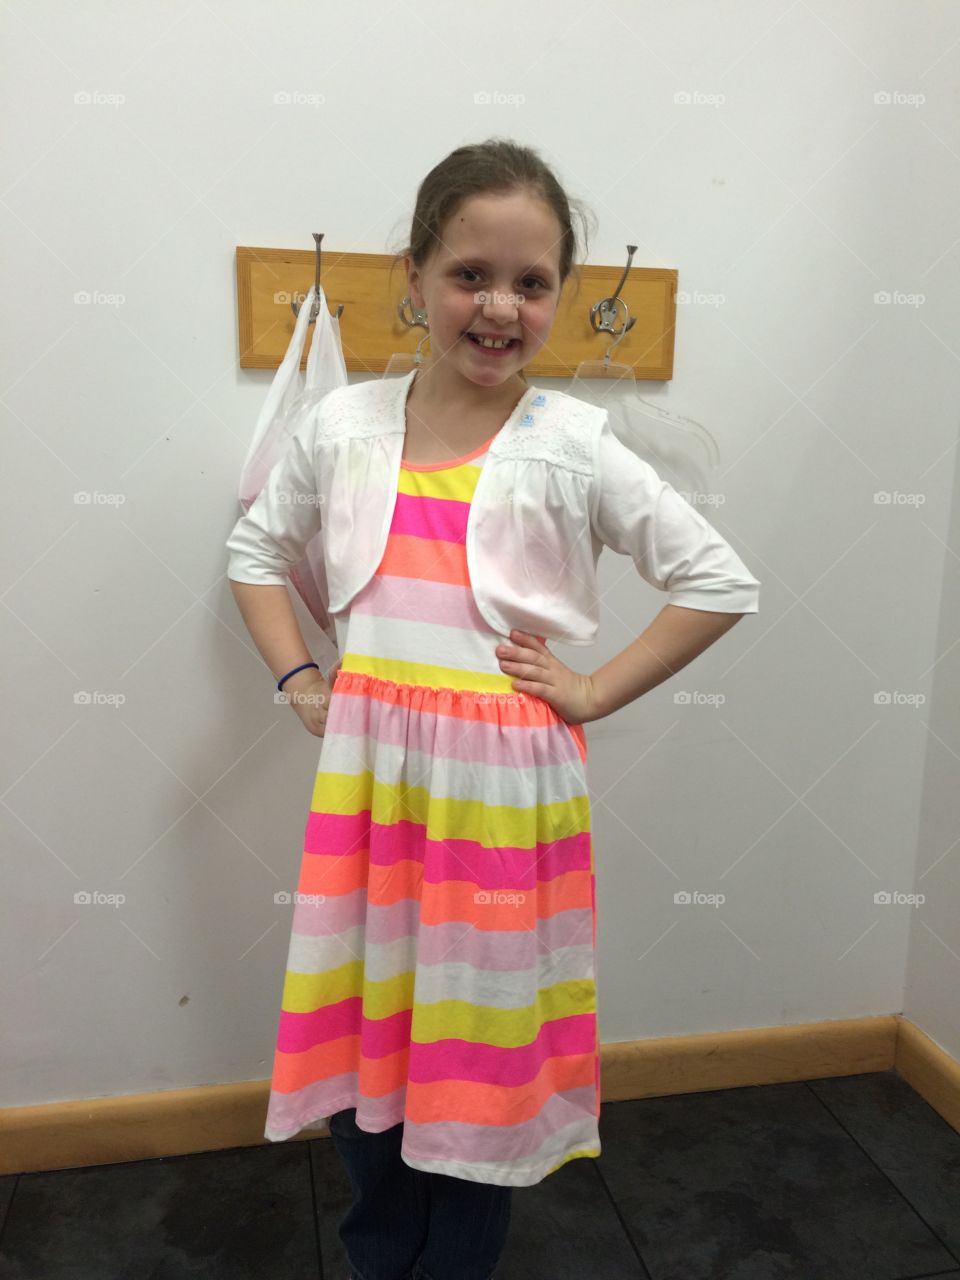 My little miss sassy step daughter trying on her dress in the dressing room. She loved the dress and was beautiful in it. Fun memories made shopping with this sassy girl!